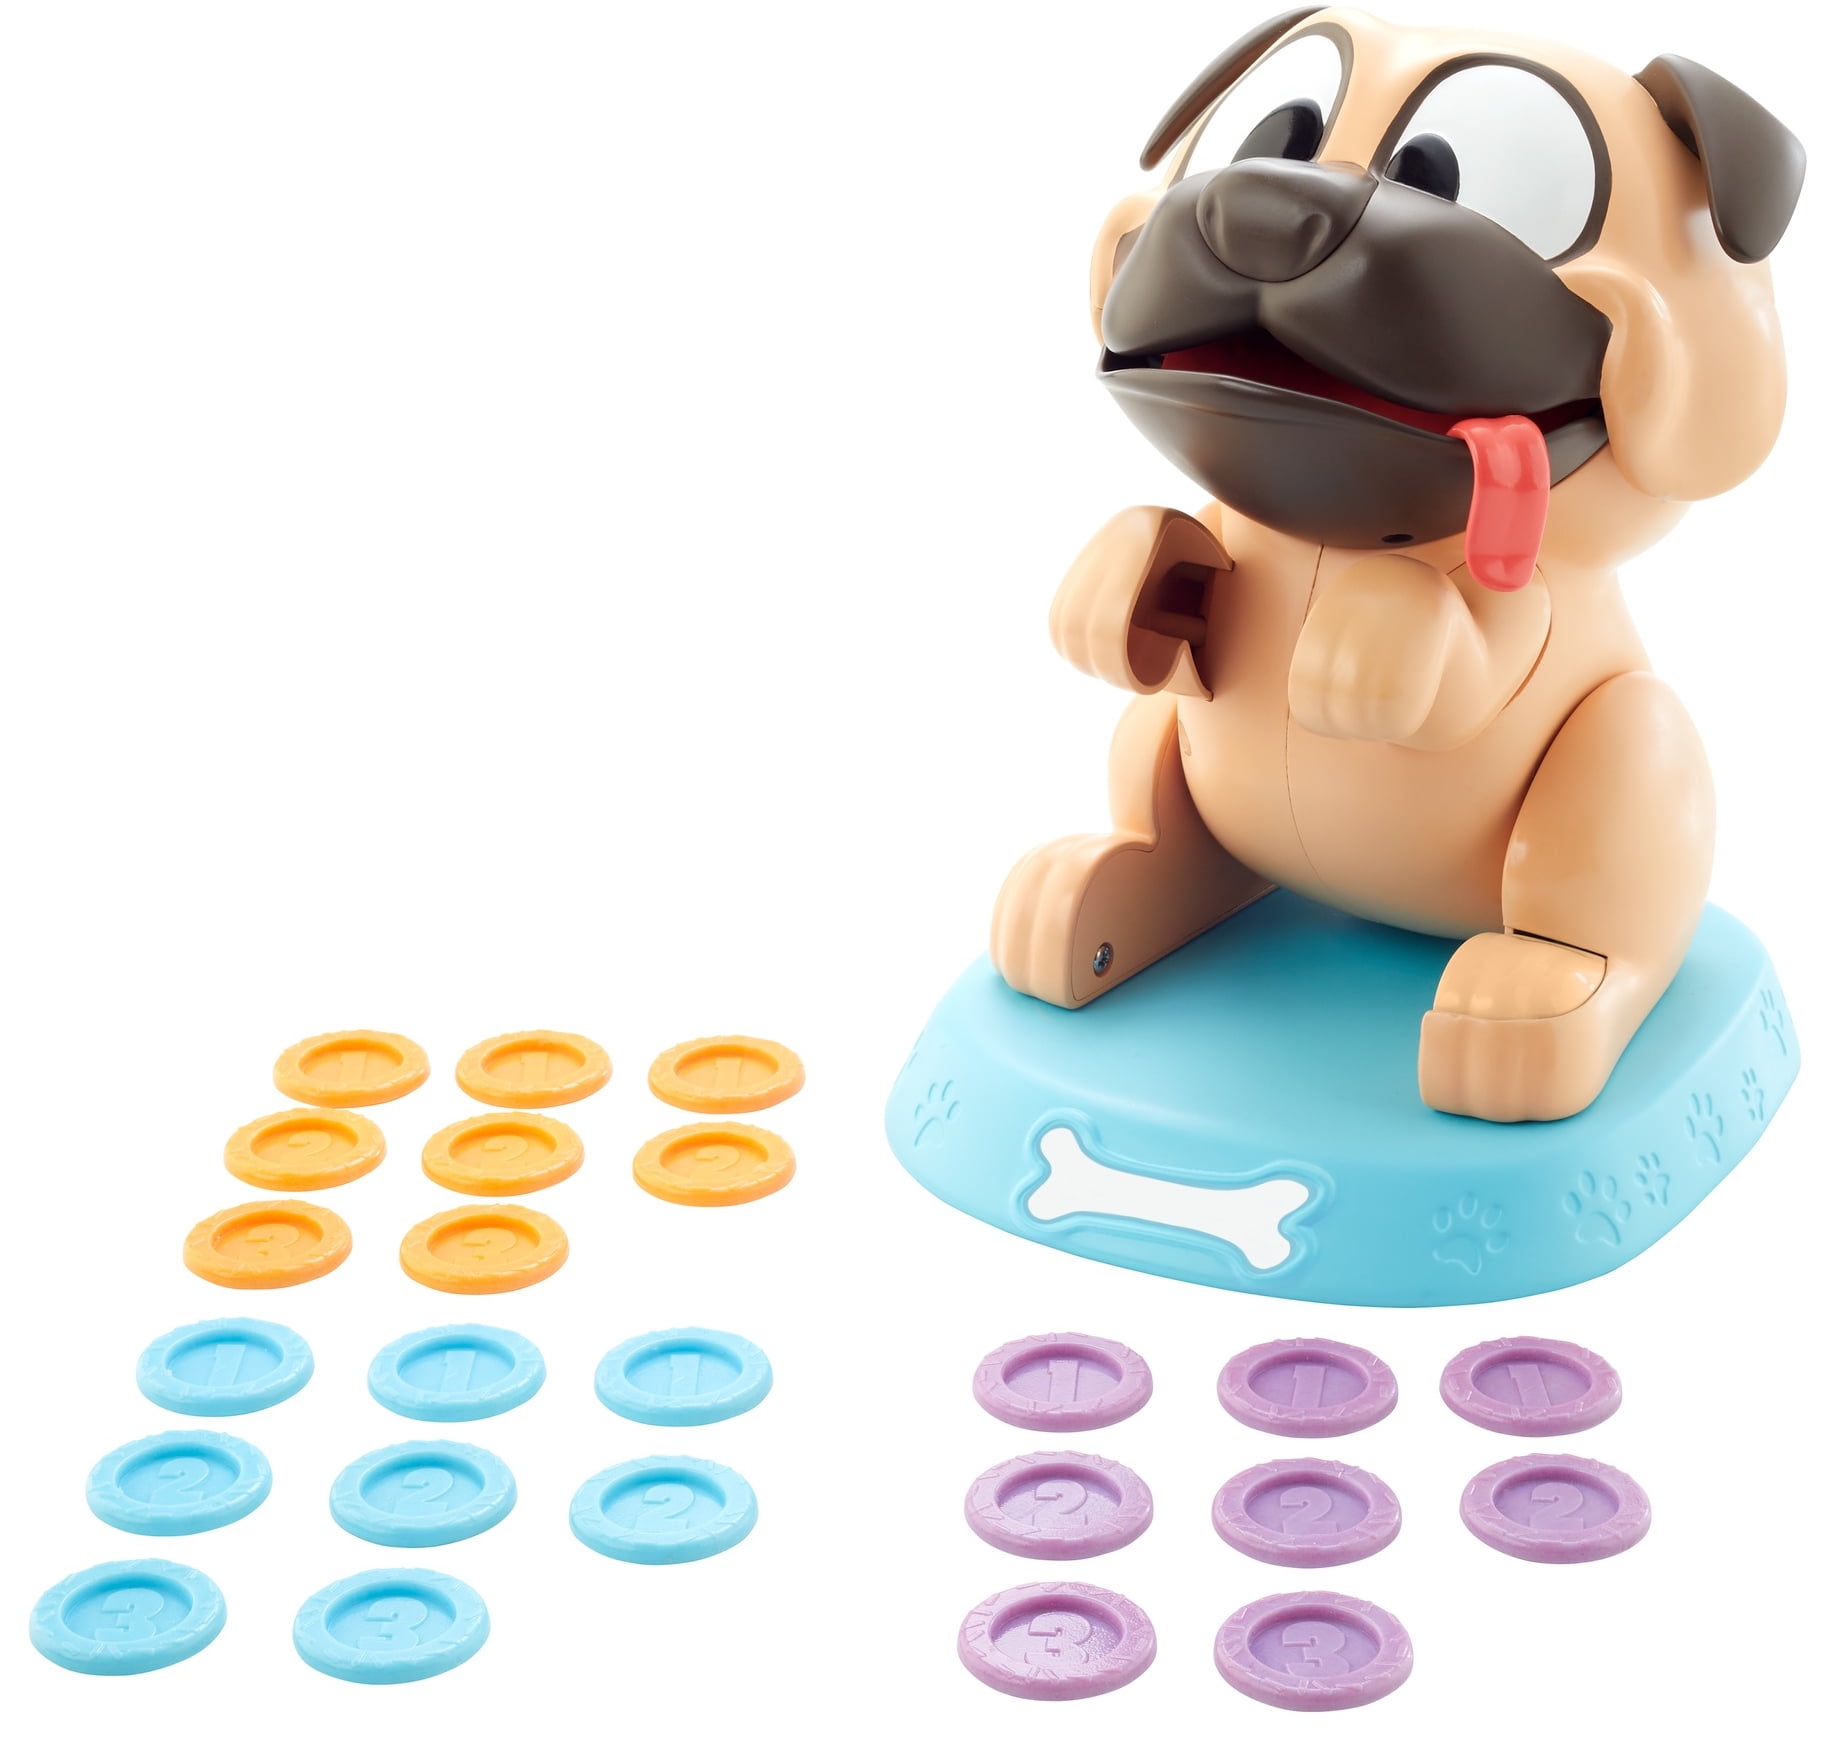 Boardgame Table Top Fun 2-4 Players NEW Puglicious Mattel Game Kids Age 5 